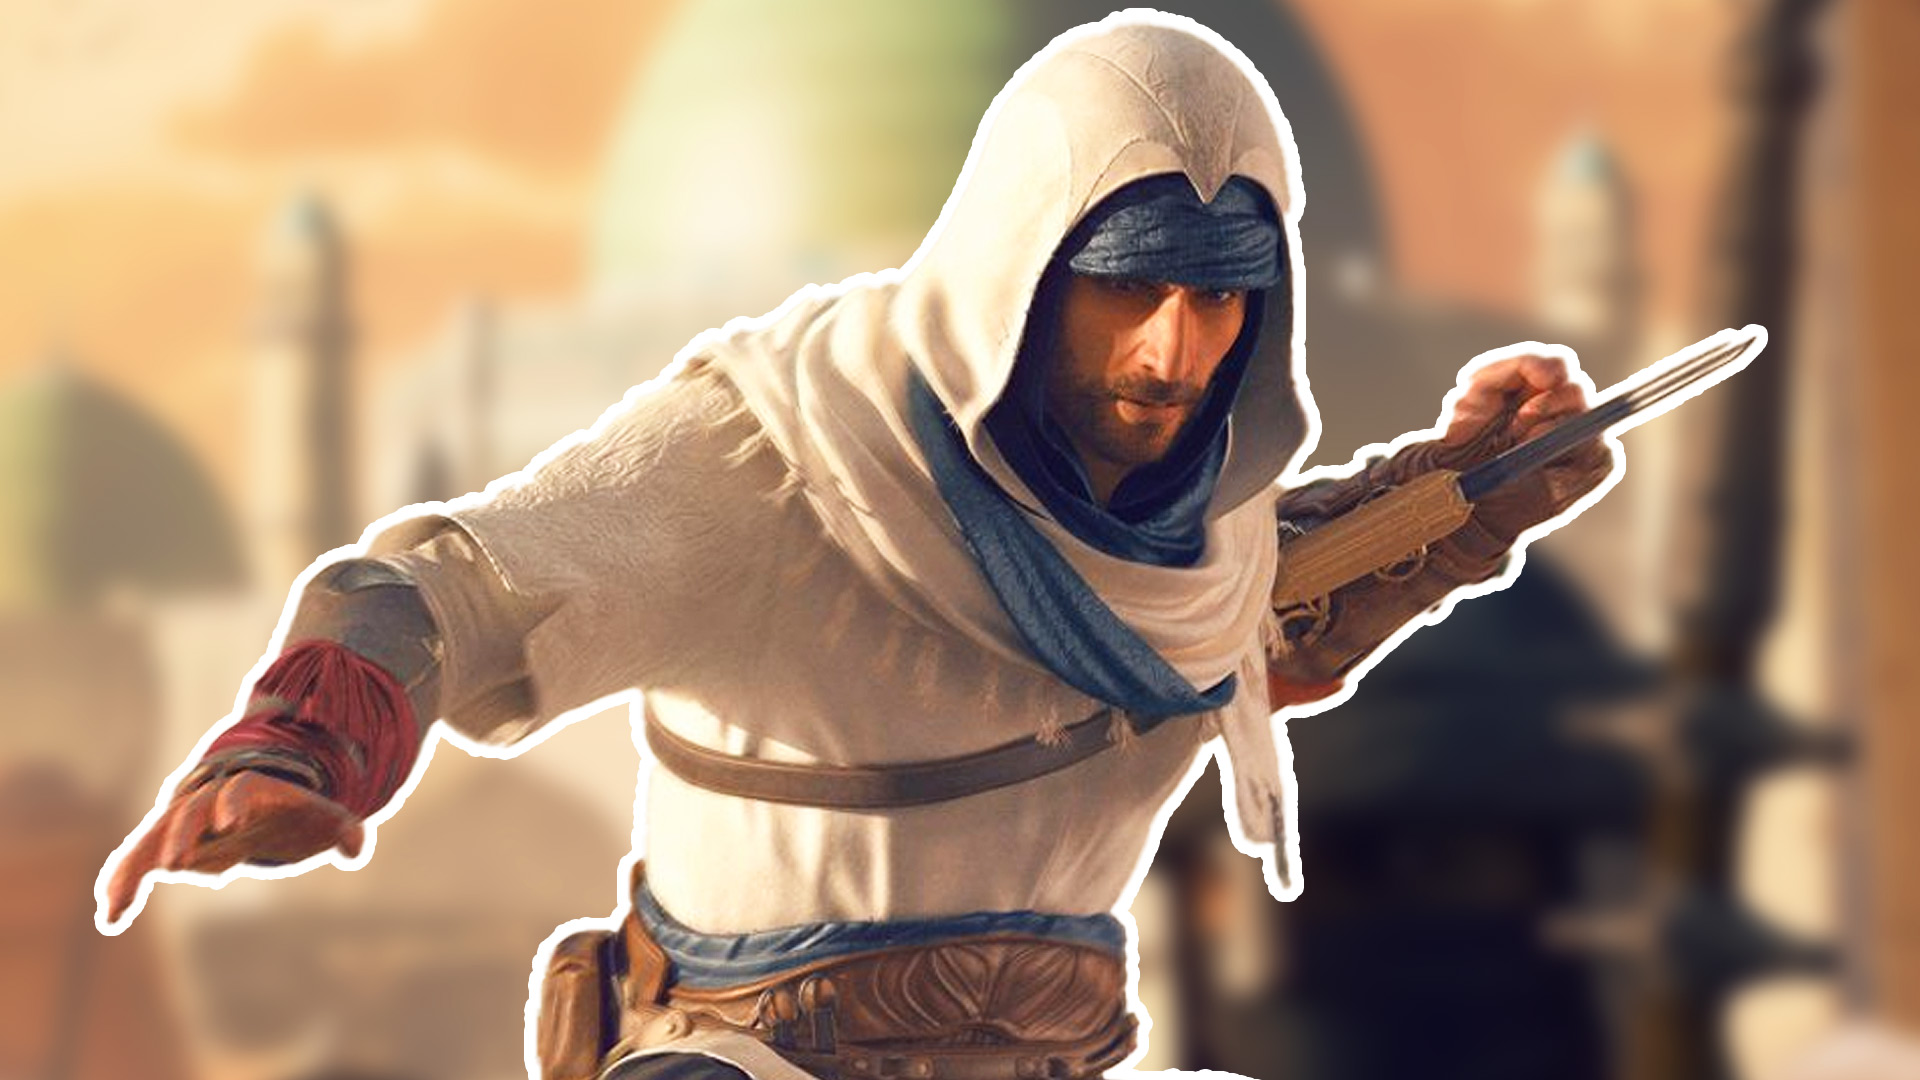 9 Games Like Assassin's Creed to Play in 2023